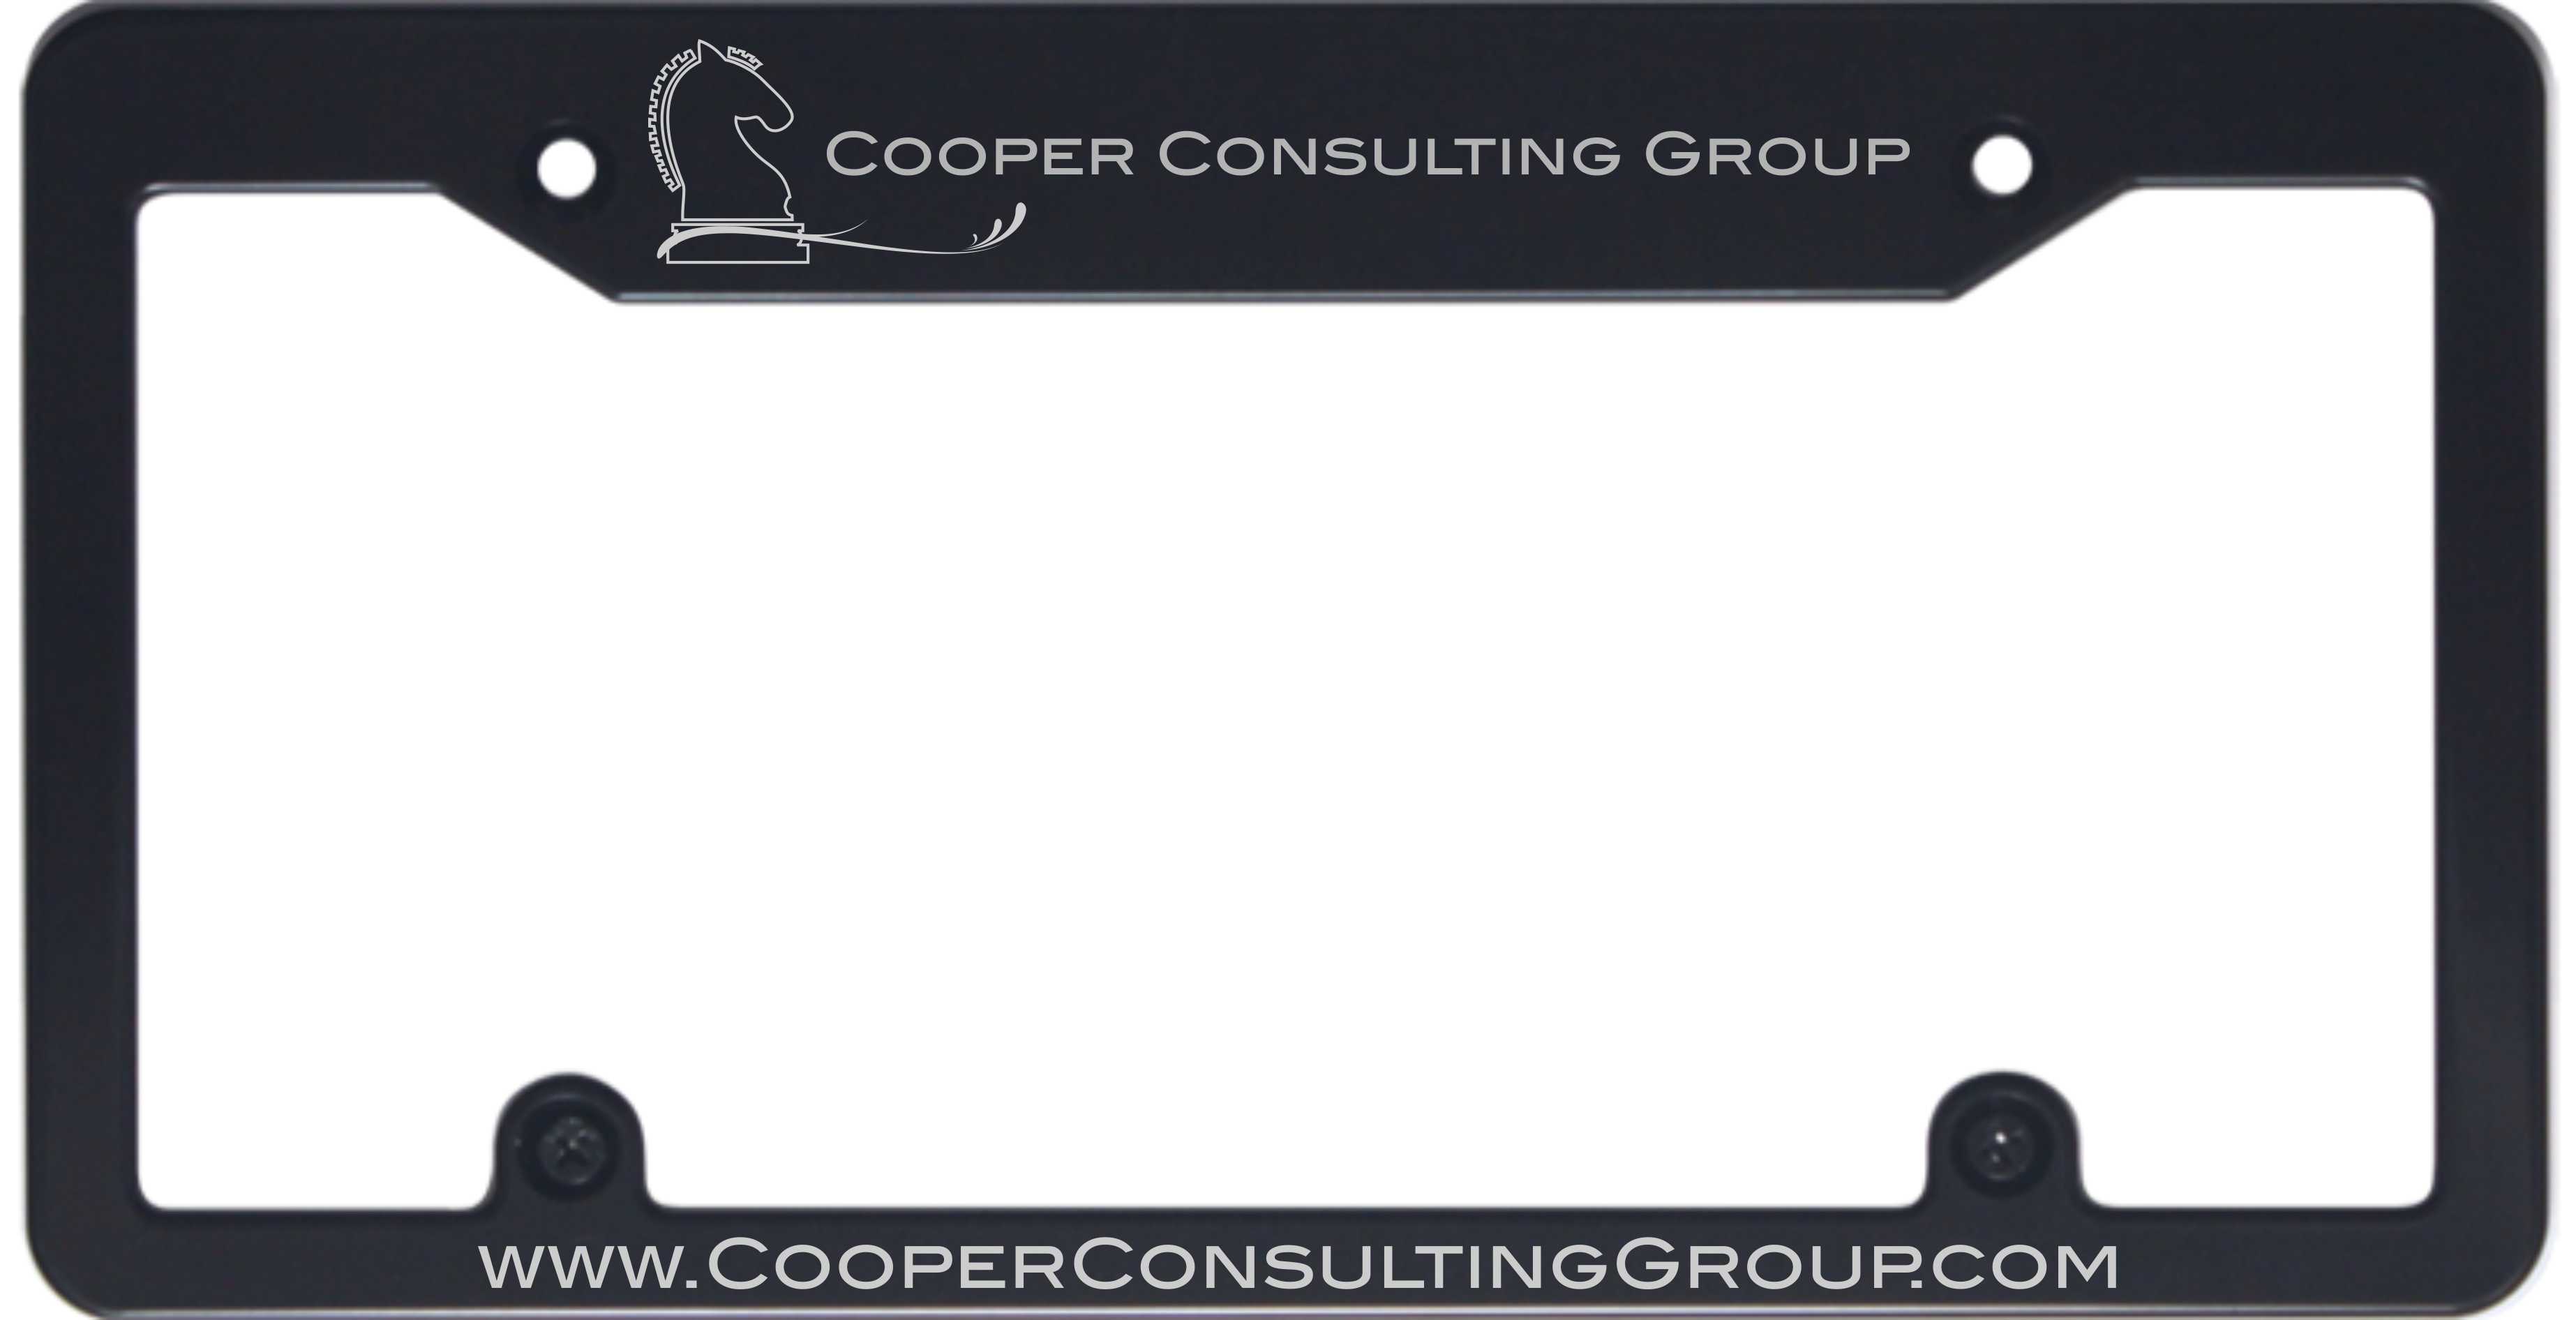 Cooper Consulting Group